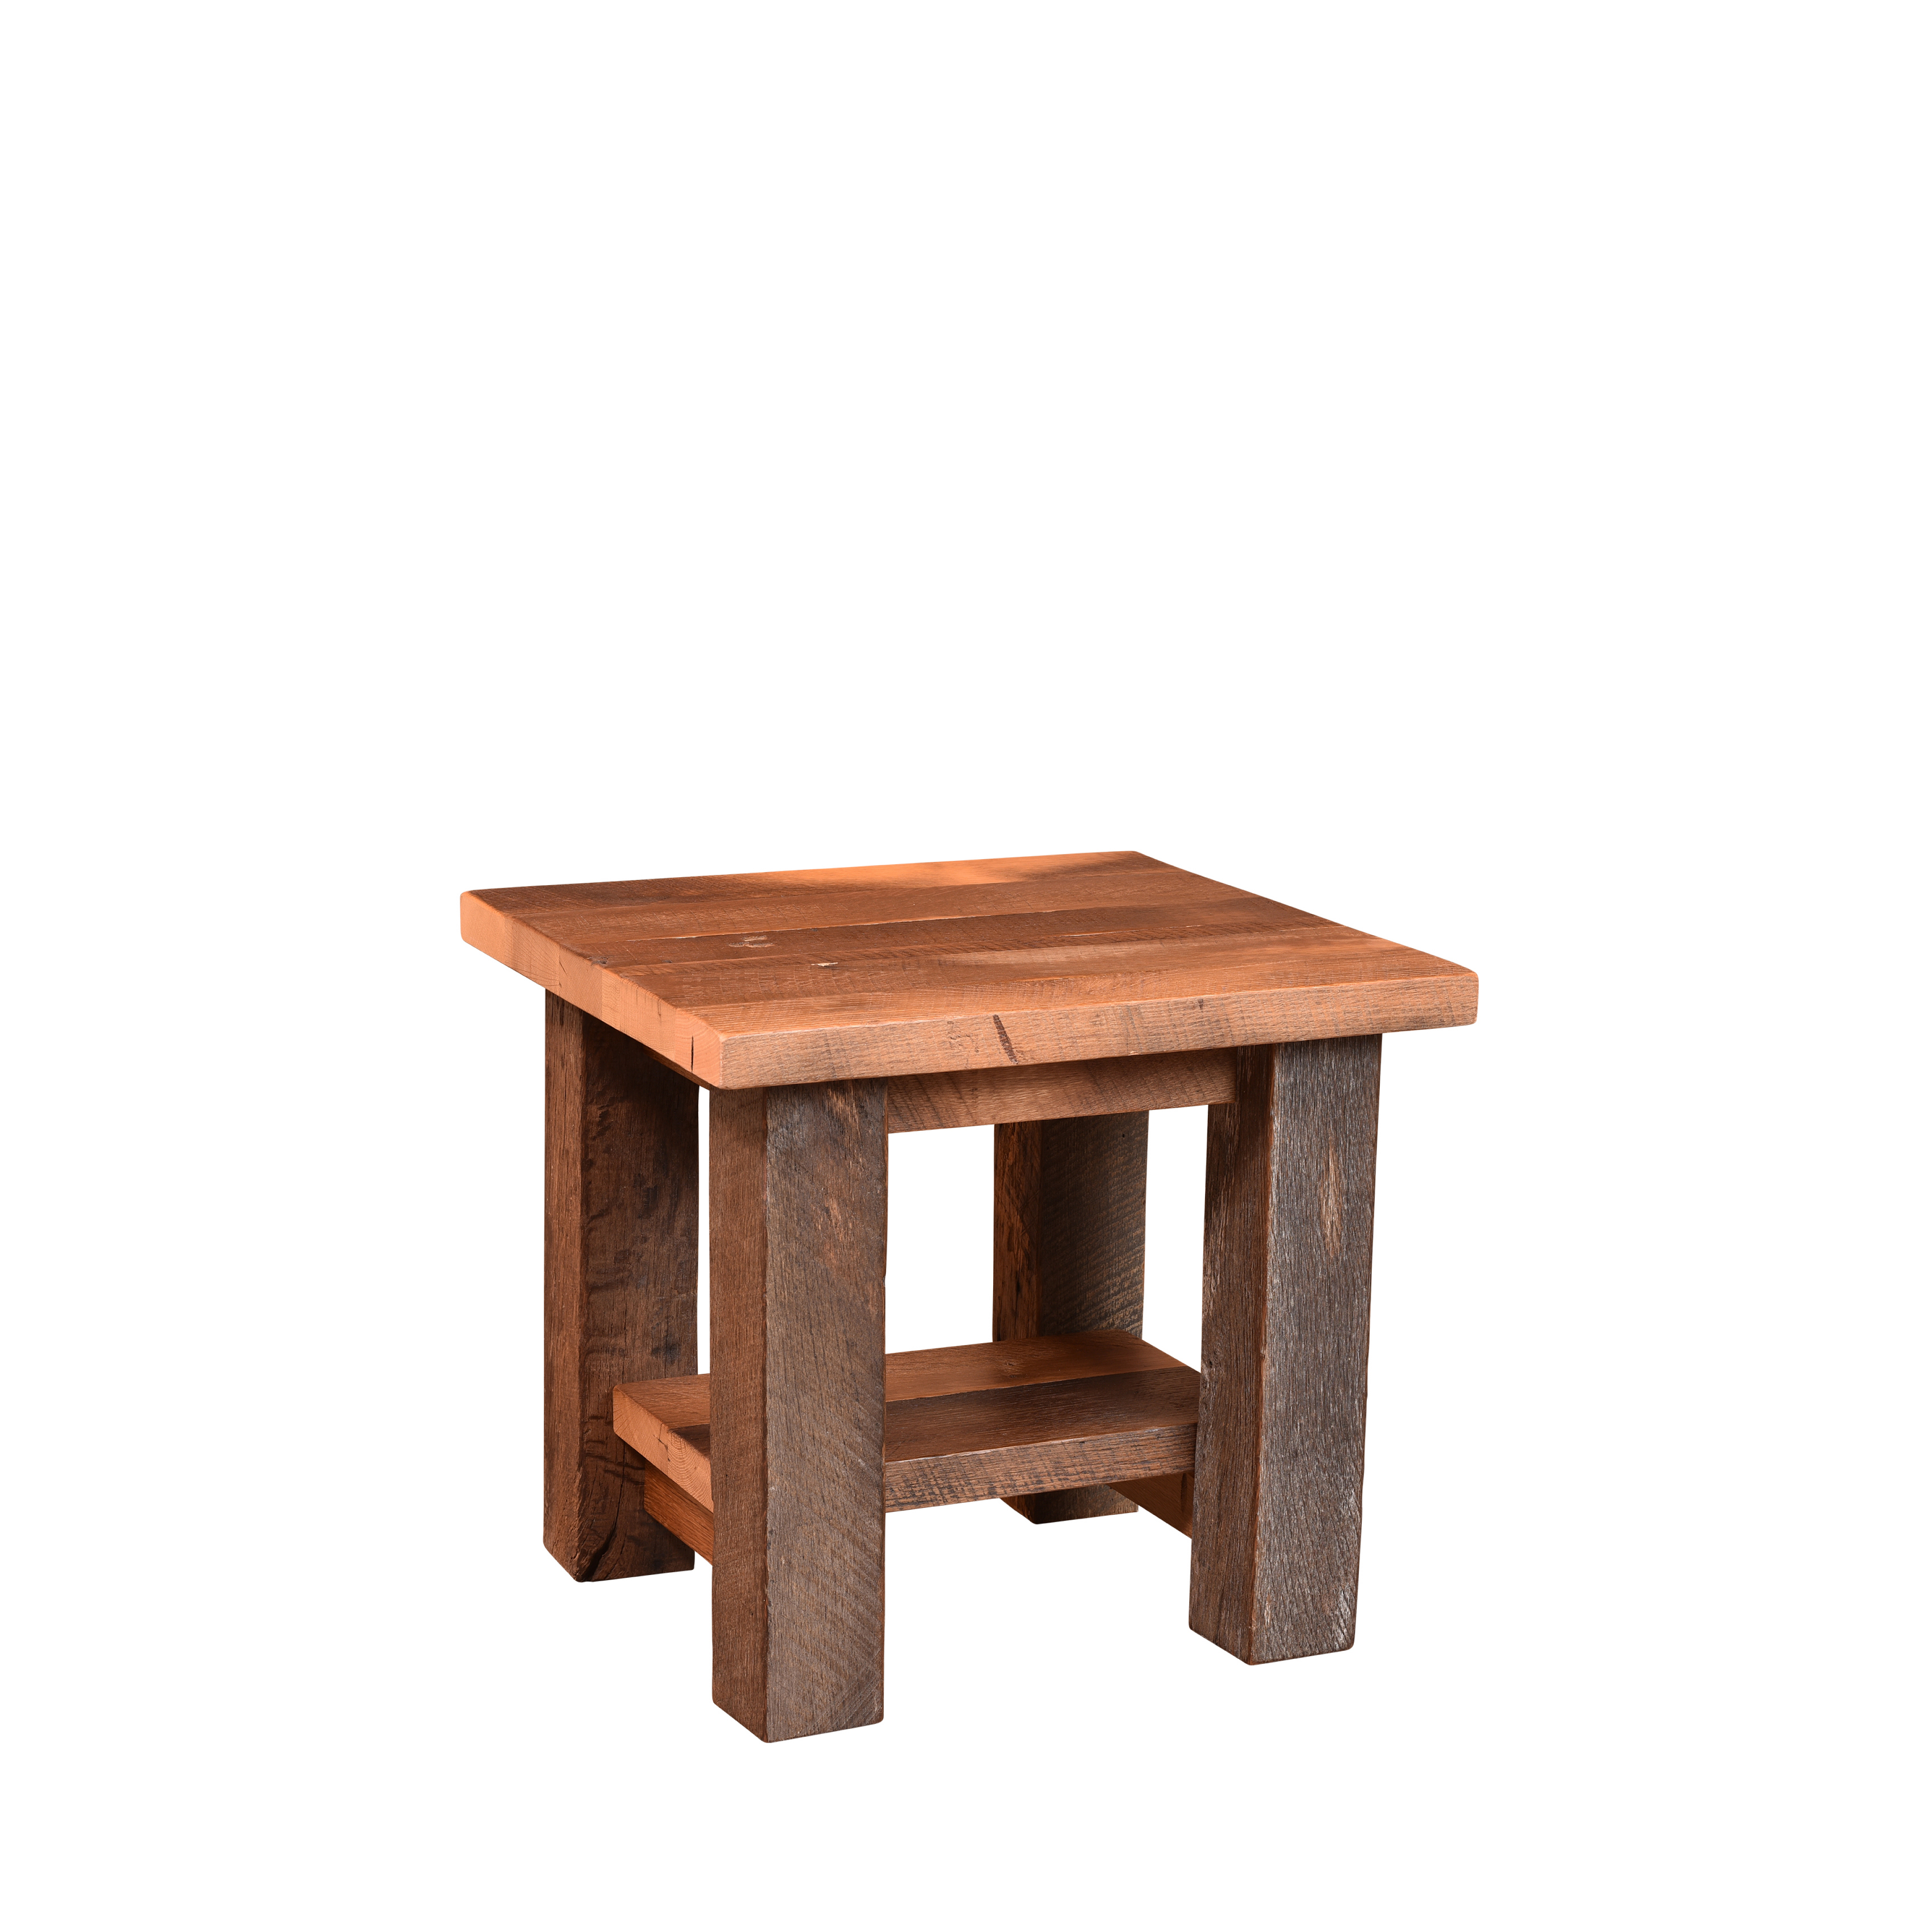 Reclaimed Wood End Table Country, Reclaimed Wood Side Table